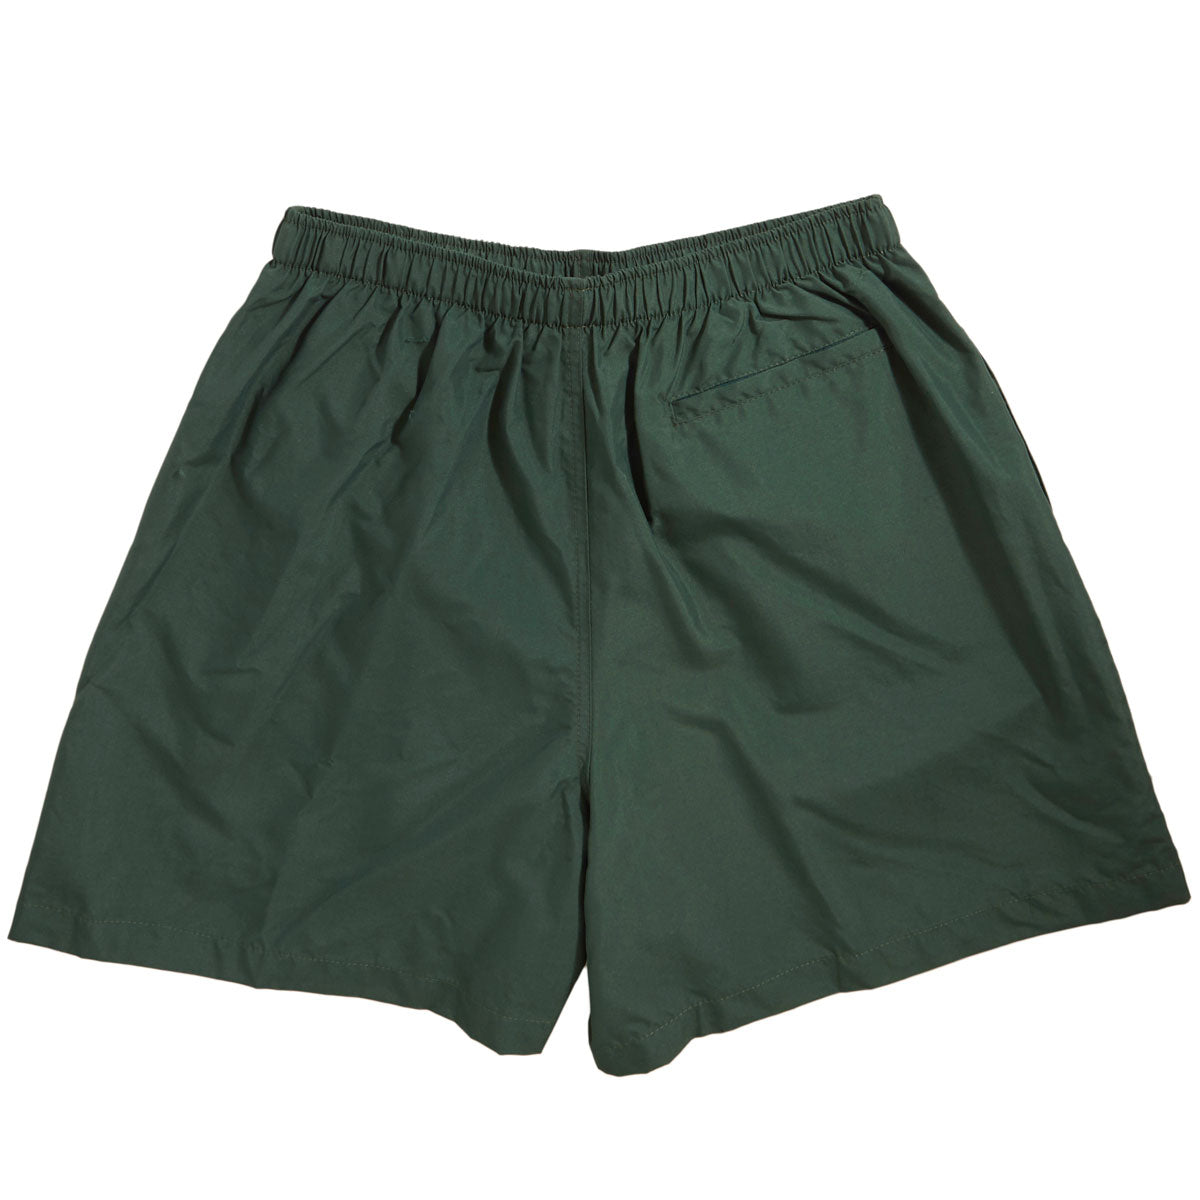 CCS 96 Neo Logo Shorts - Forest/Yellow image 2